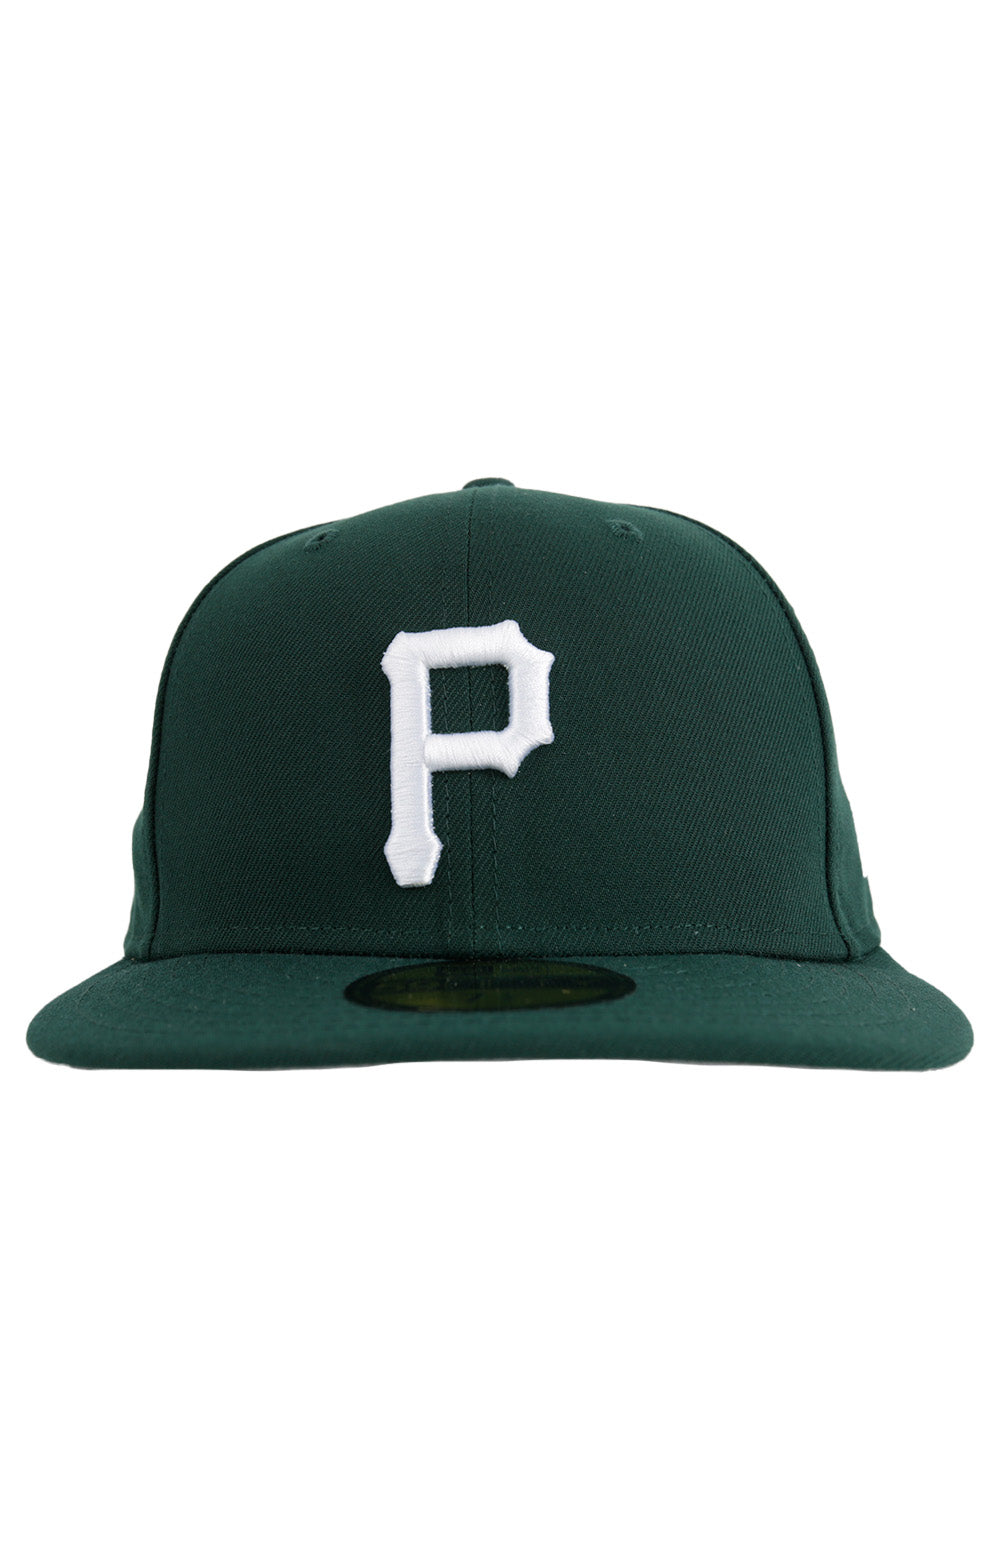 Pittsburgh Pirates LOGO BLOOM SIDE-PATCH Black-Yellow Fitted Hat